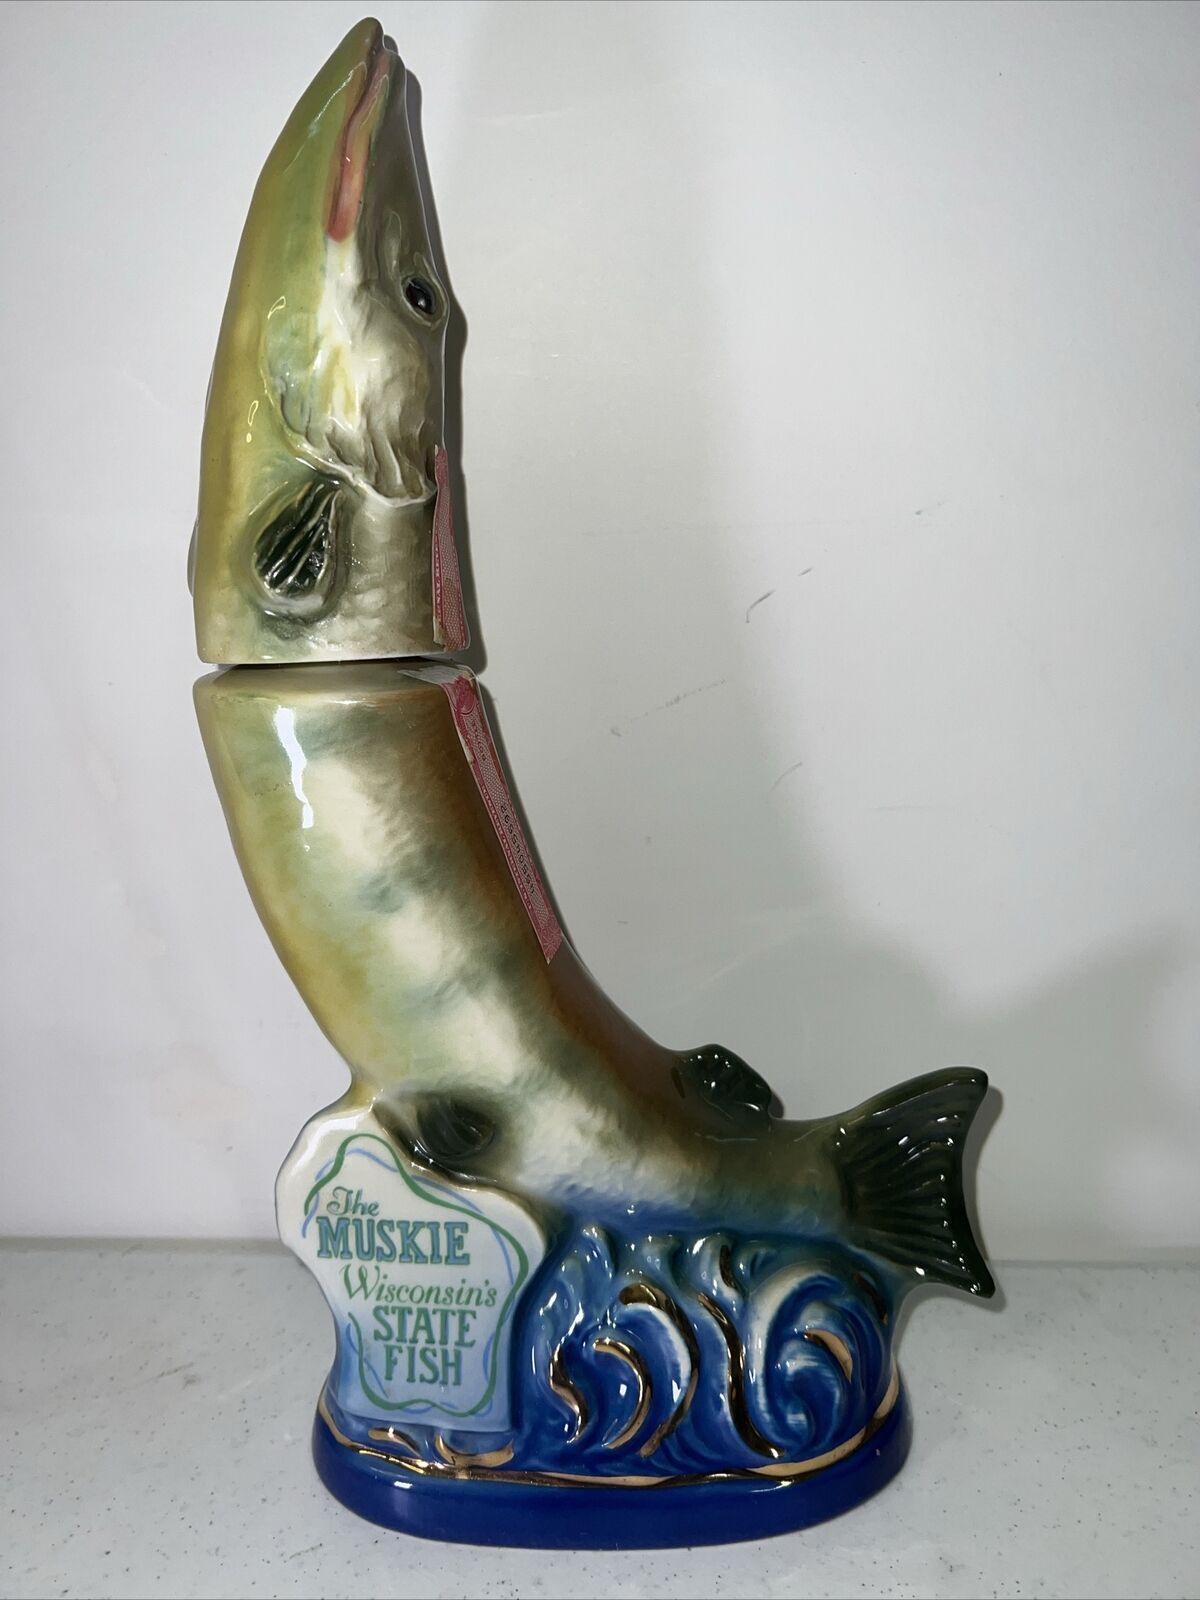 Vintage 1971 Jim Beam “Wisconsin Muskie Fishing Hall of Fame” Decanter -EMPTY-